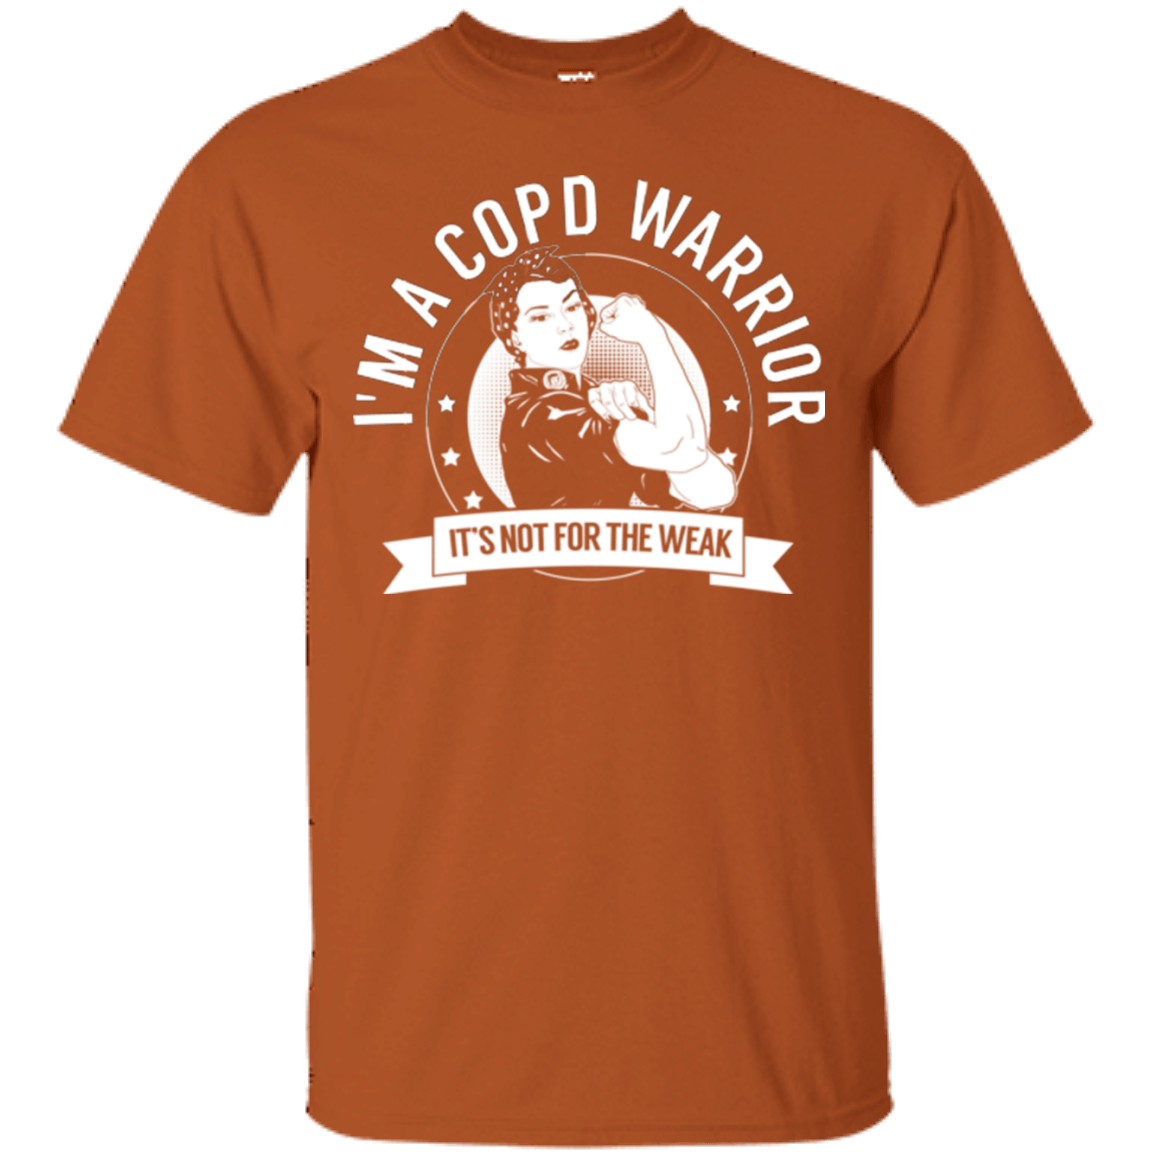 Chronic Obstructive Pulmonary Disease - COPD Warrior Not For The Weak Unisex Shirt - The Unchargeables